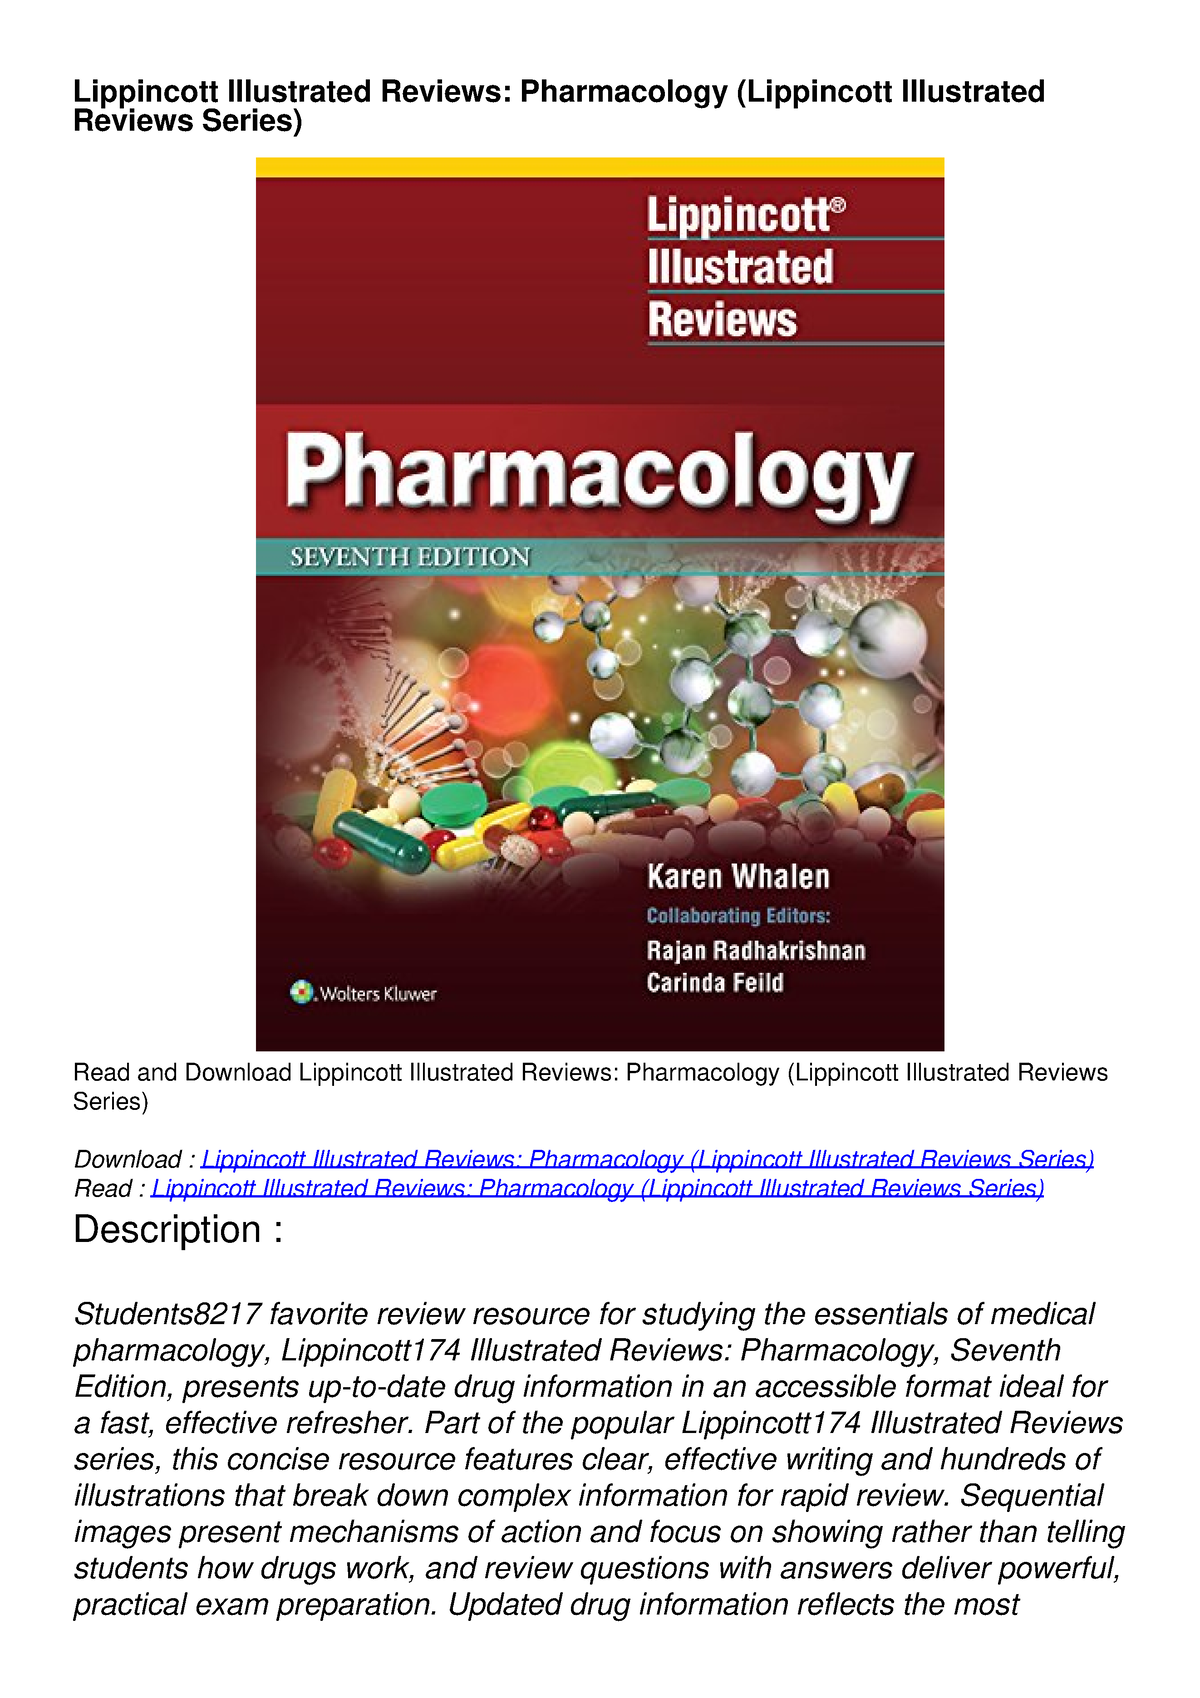 lippincott illustrated reviews pharmacology 5th edition pdf download